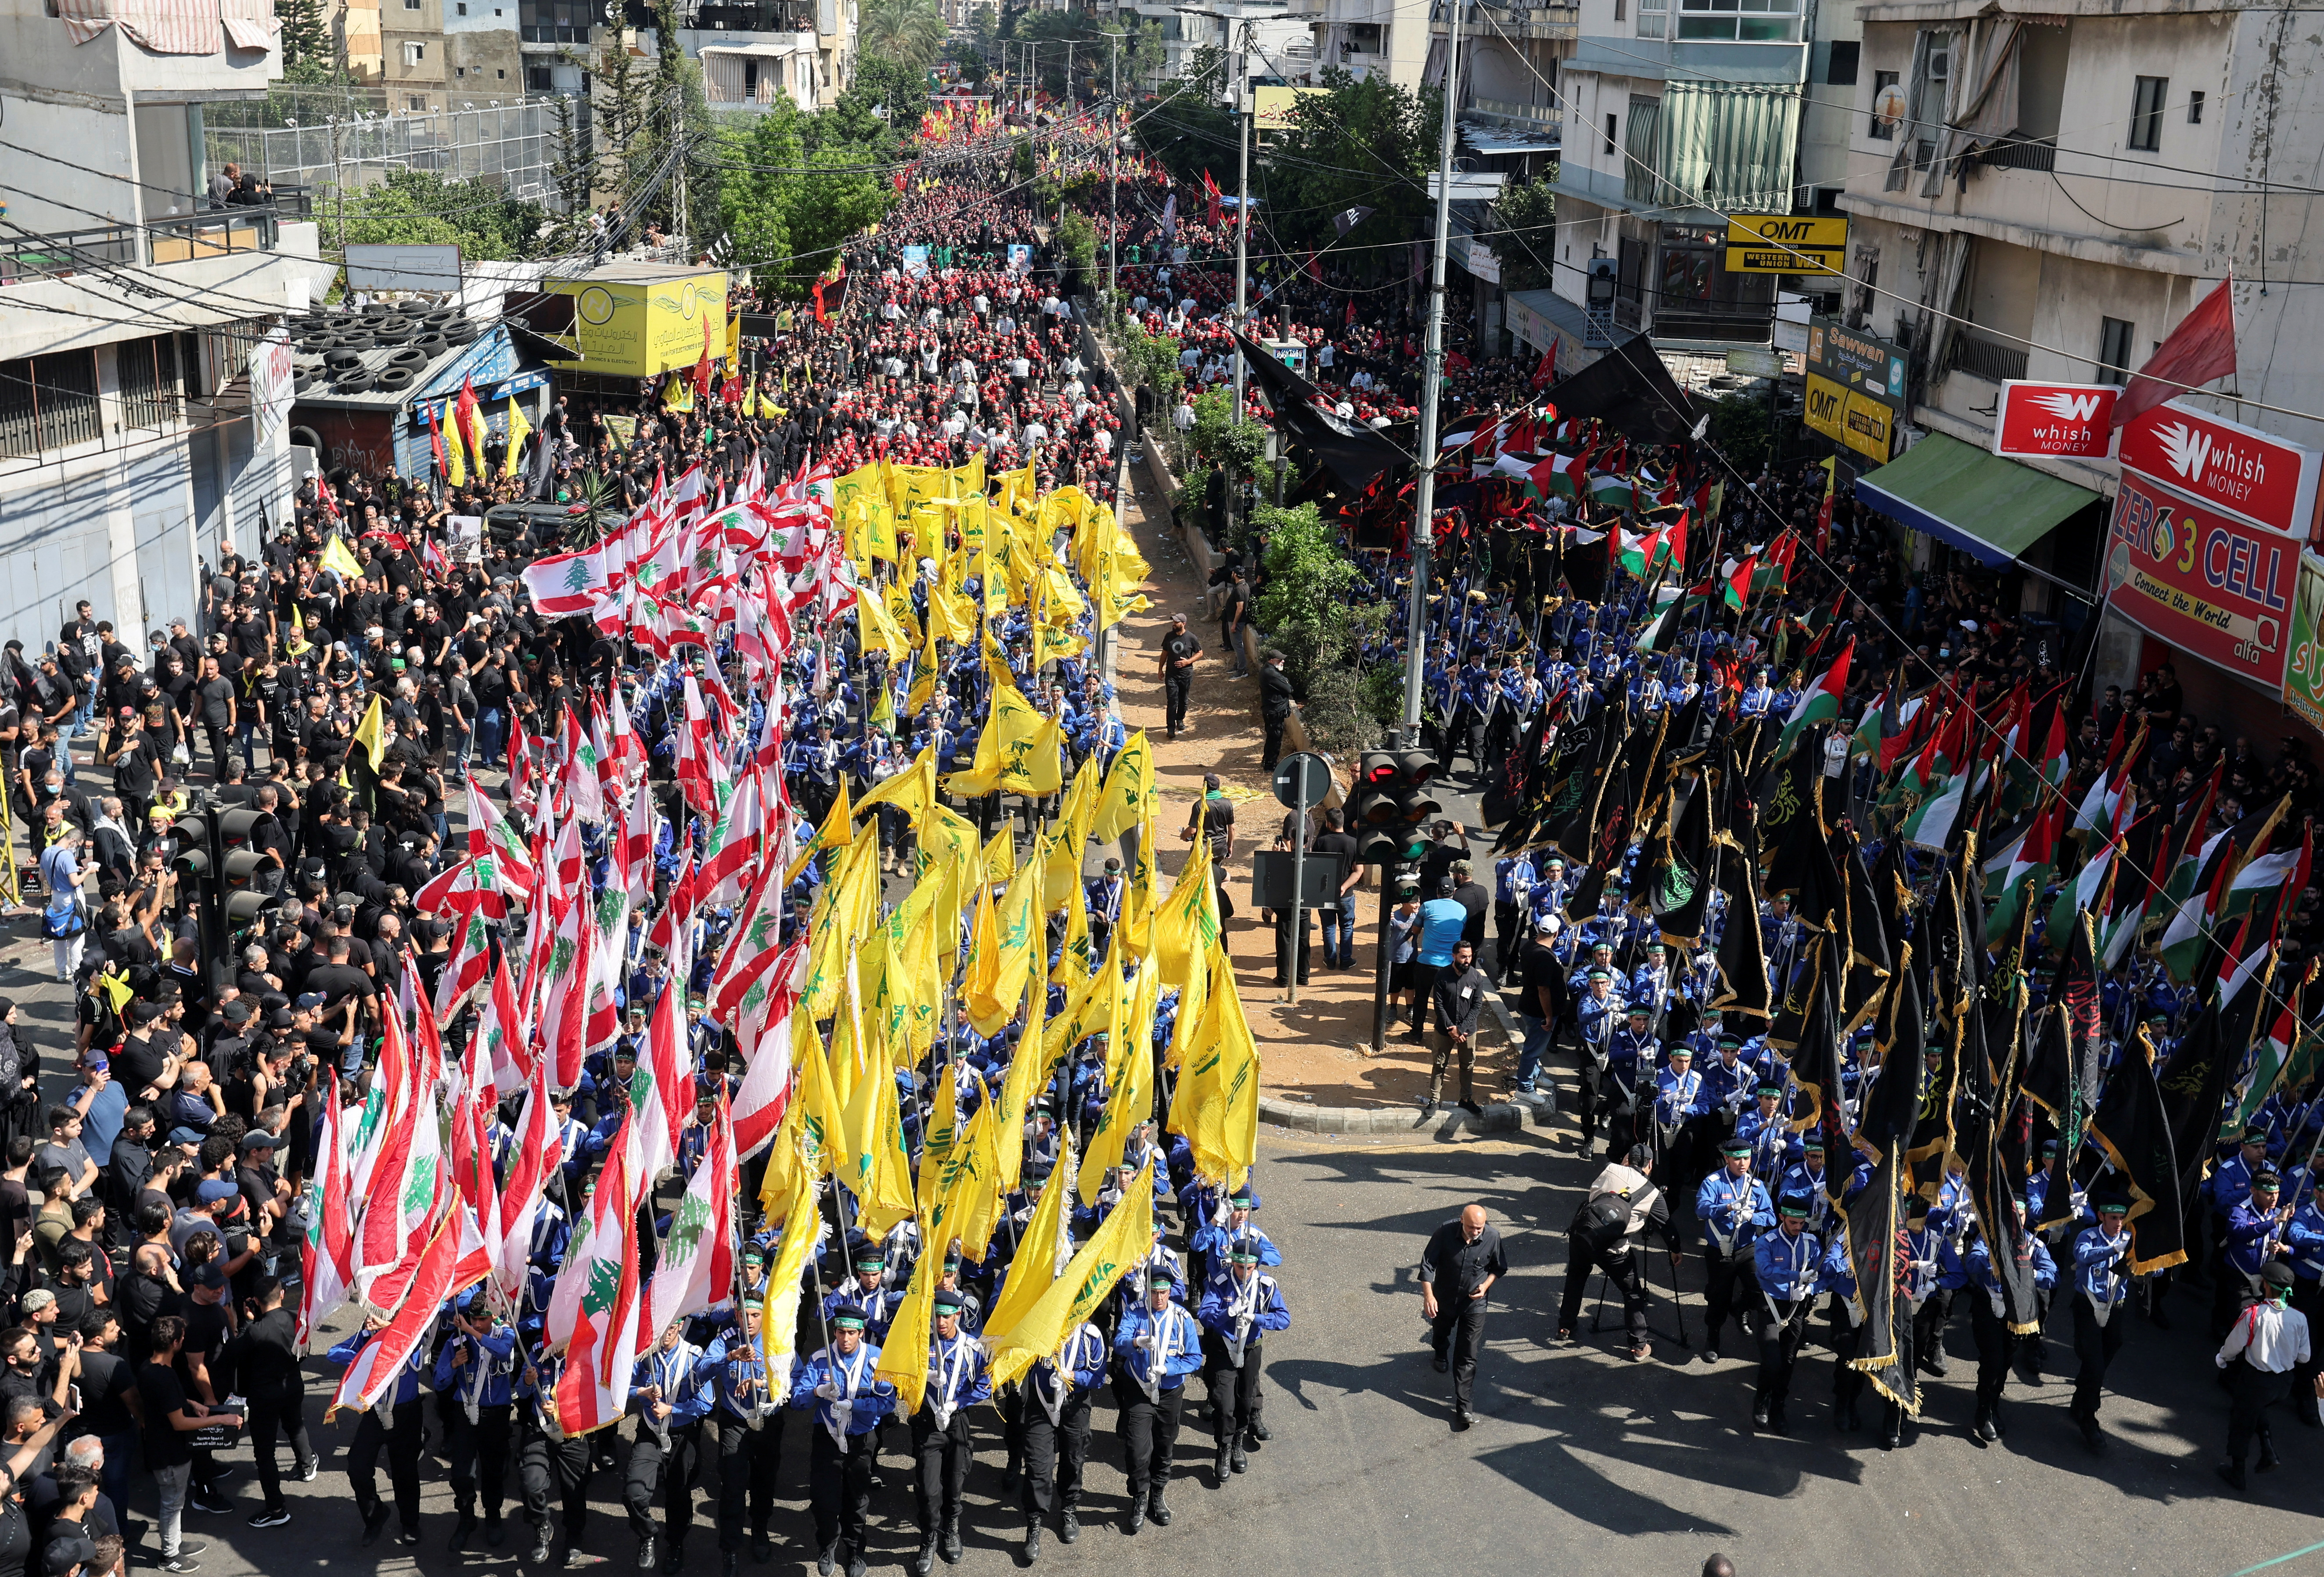 Lebanon's Imam al-Mahdi Scouts carry flags during a religious procession to mark Ashura in Beirut's suburbs